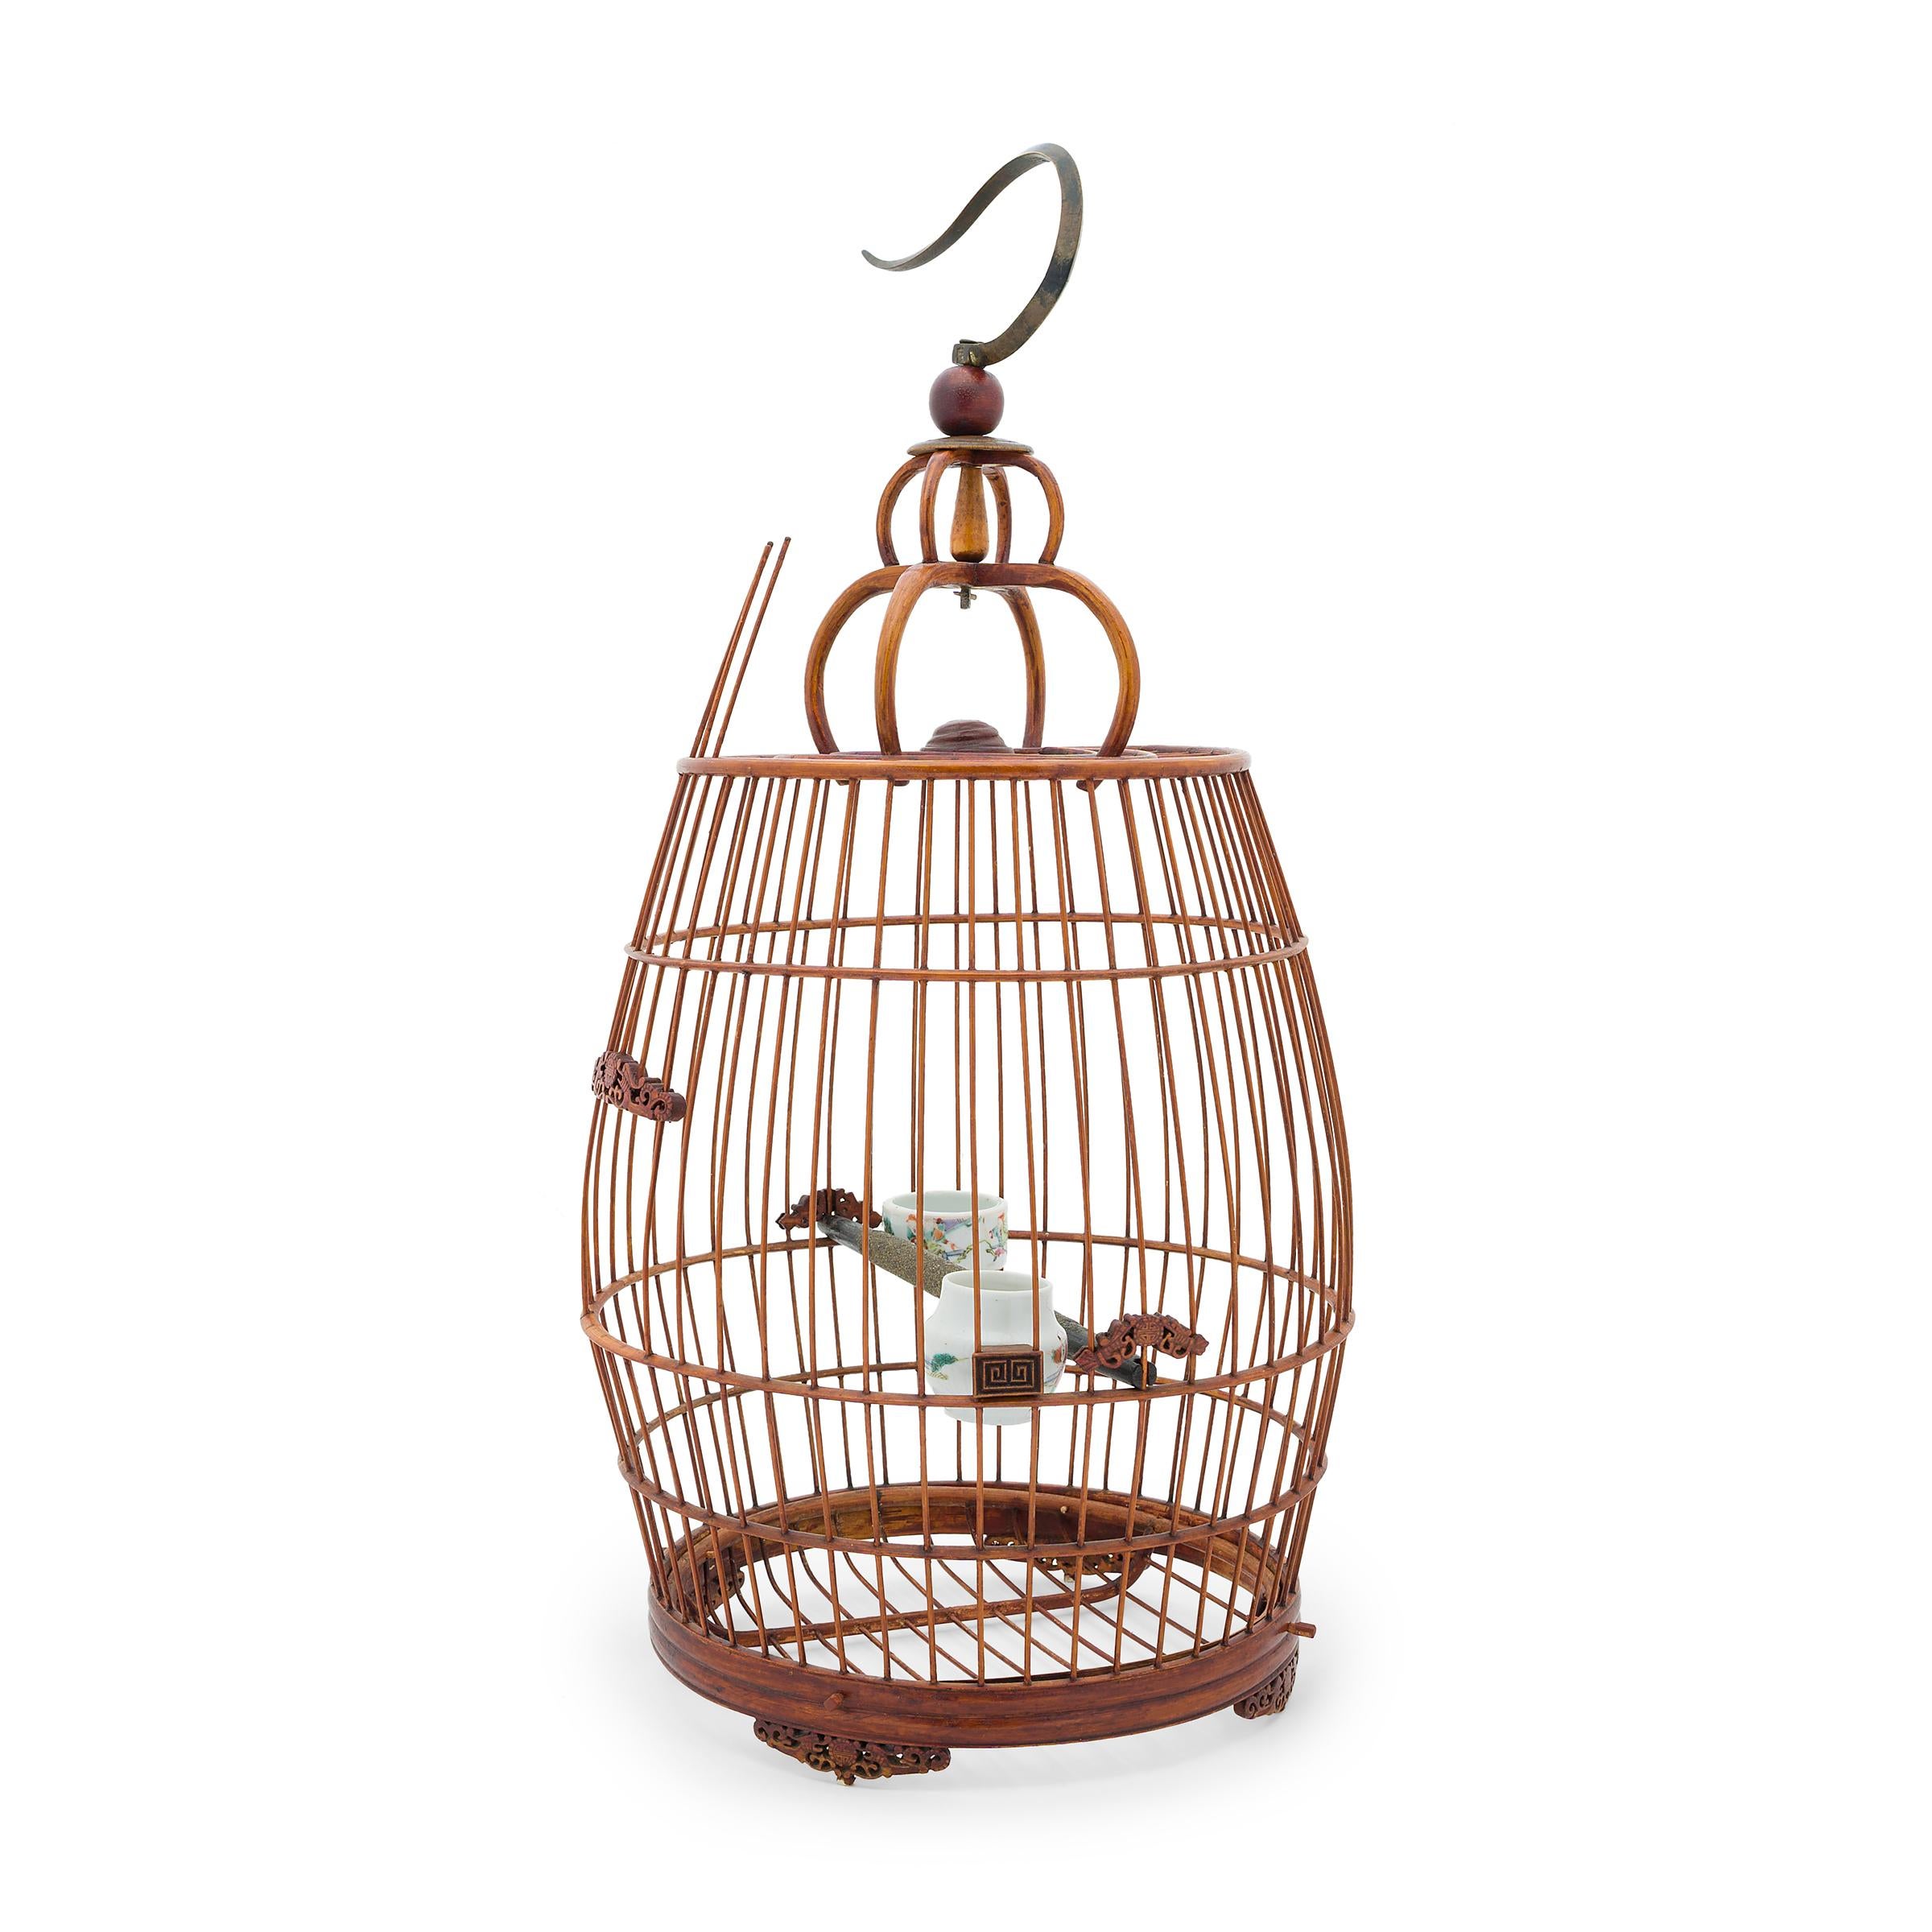 This large wooden birdcage was once home to the tiny pet bird of a Qing-dynasty aristocrat. Dated to the early 20th century, this barrel-form cage is carefully assembled of thin bamboo rods set within a bent bamboo frame. Small fretwork carvings